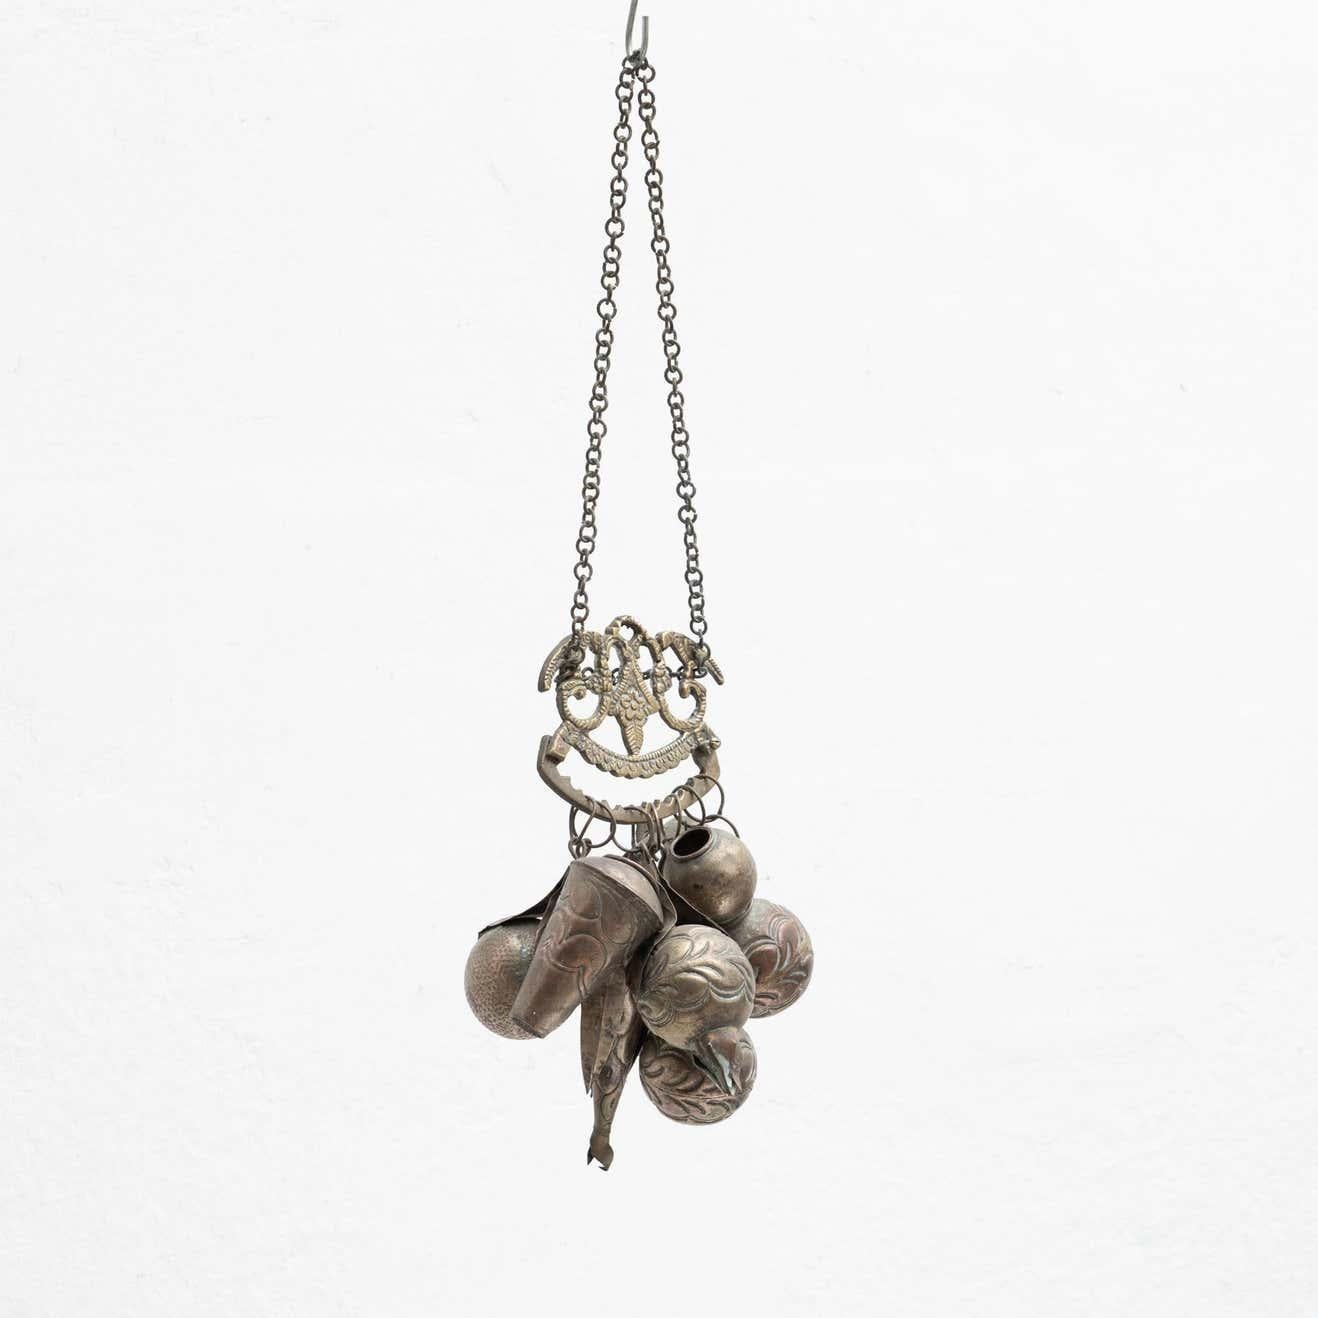 Early 20th century metal hanging amulet from native culture in Brazil. Known as 'Penca de Balangadas' was used in the ancient times as an amulet by the scale population in Brazil.

Made in Brazil by unknown artist, circa 1890.

In original